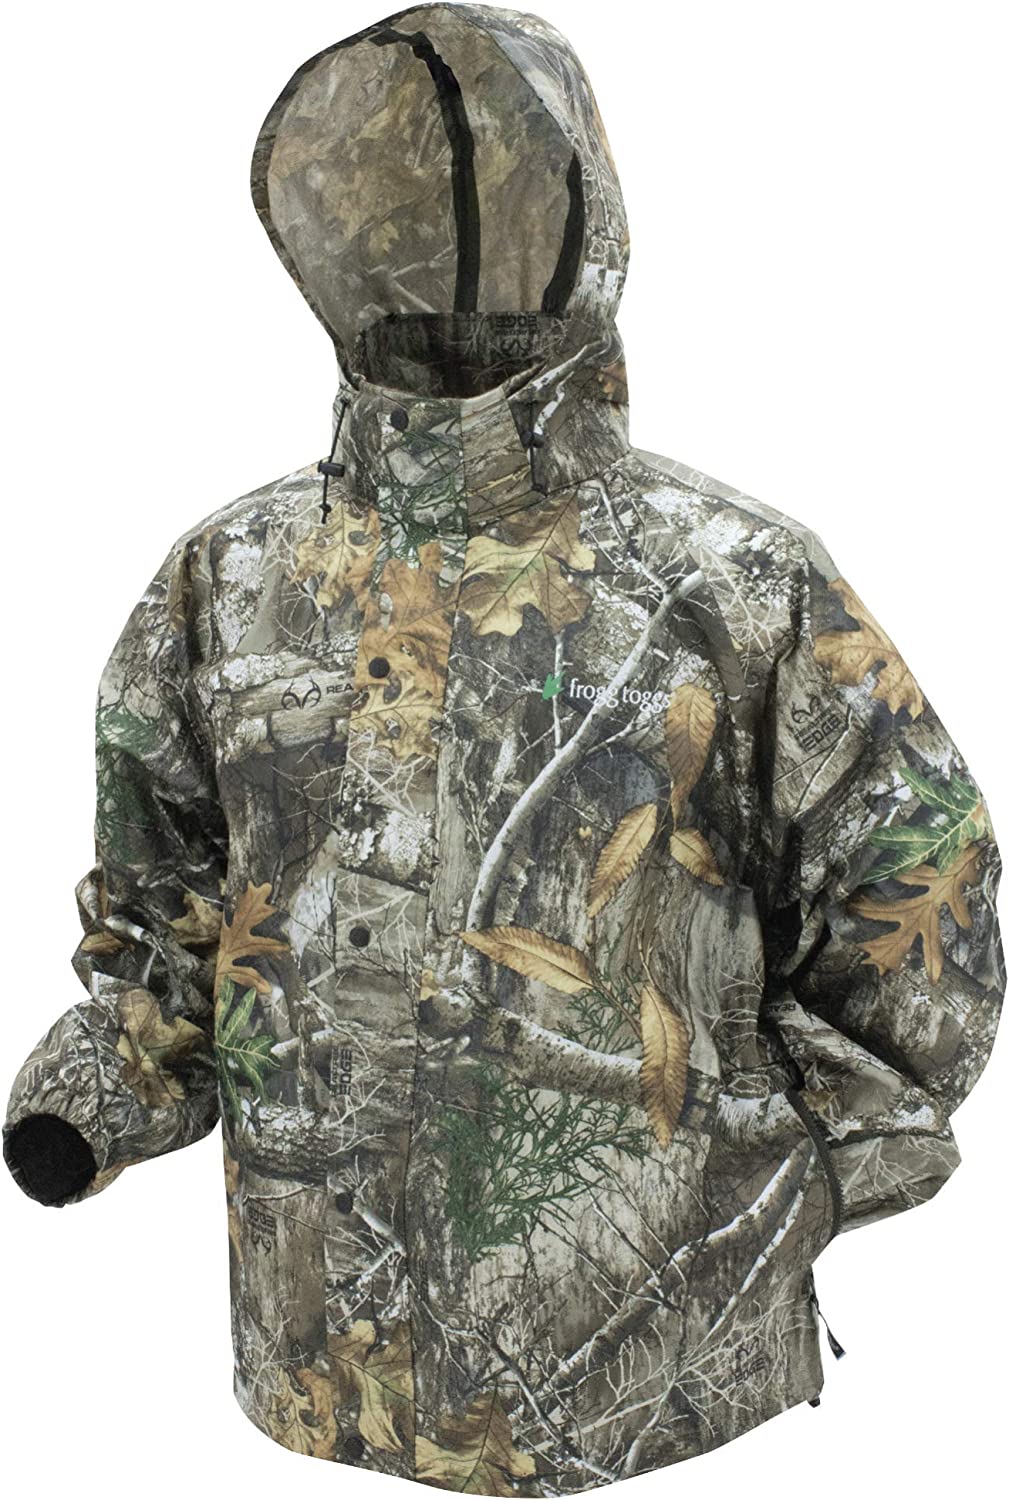 FROGG TOGGS Men’s Standard Classic Pro Action Waterproof Breathable Rain Jacket, Realtree Edge, Small